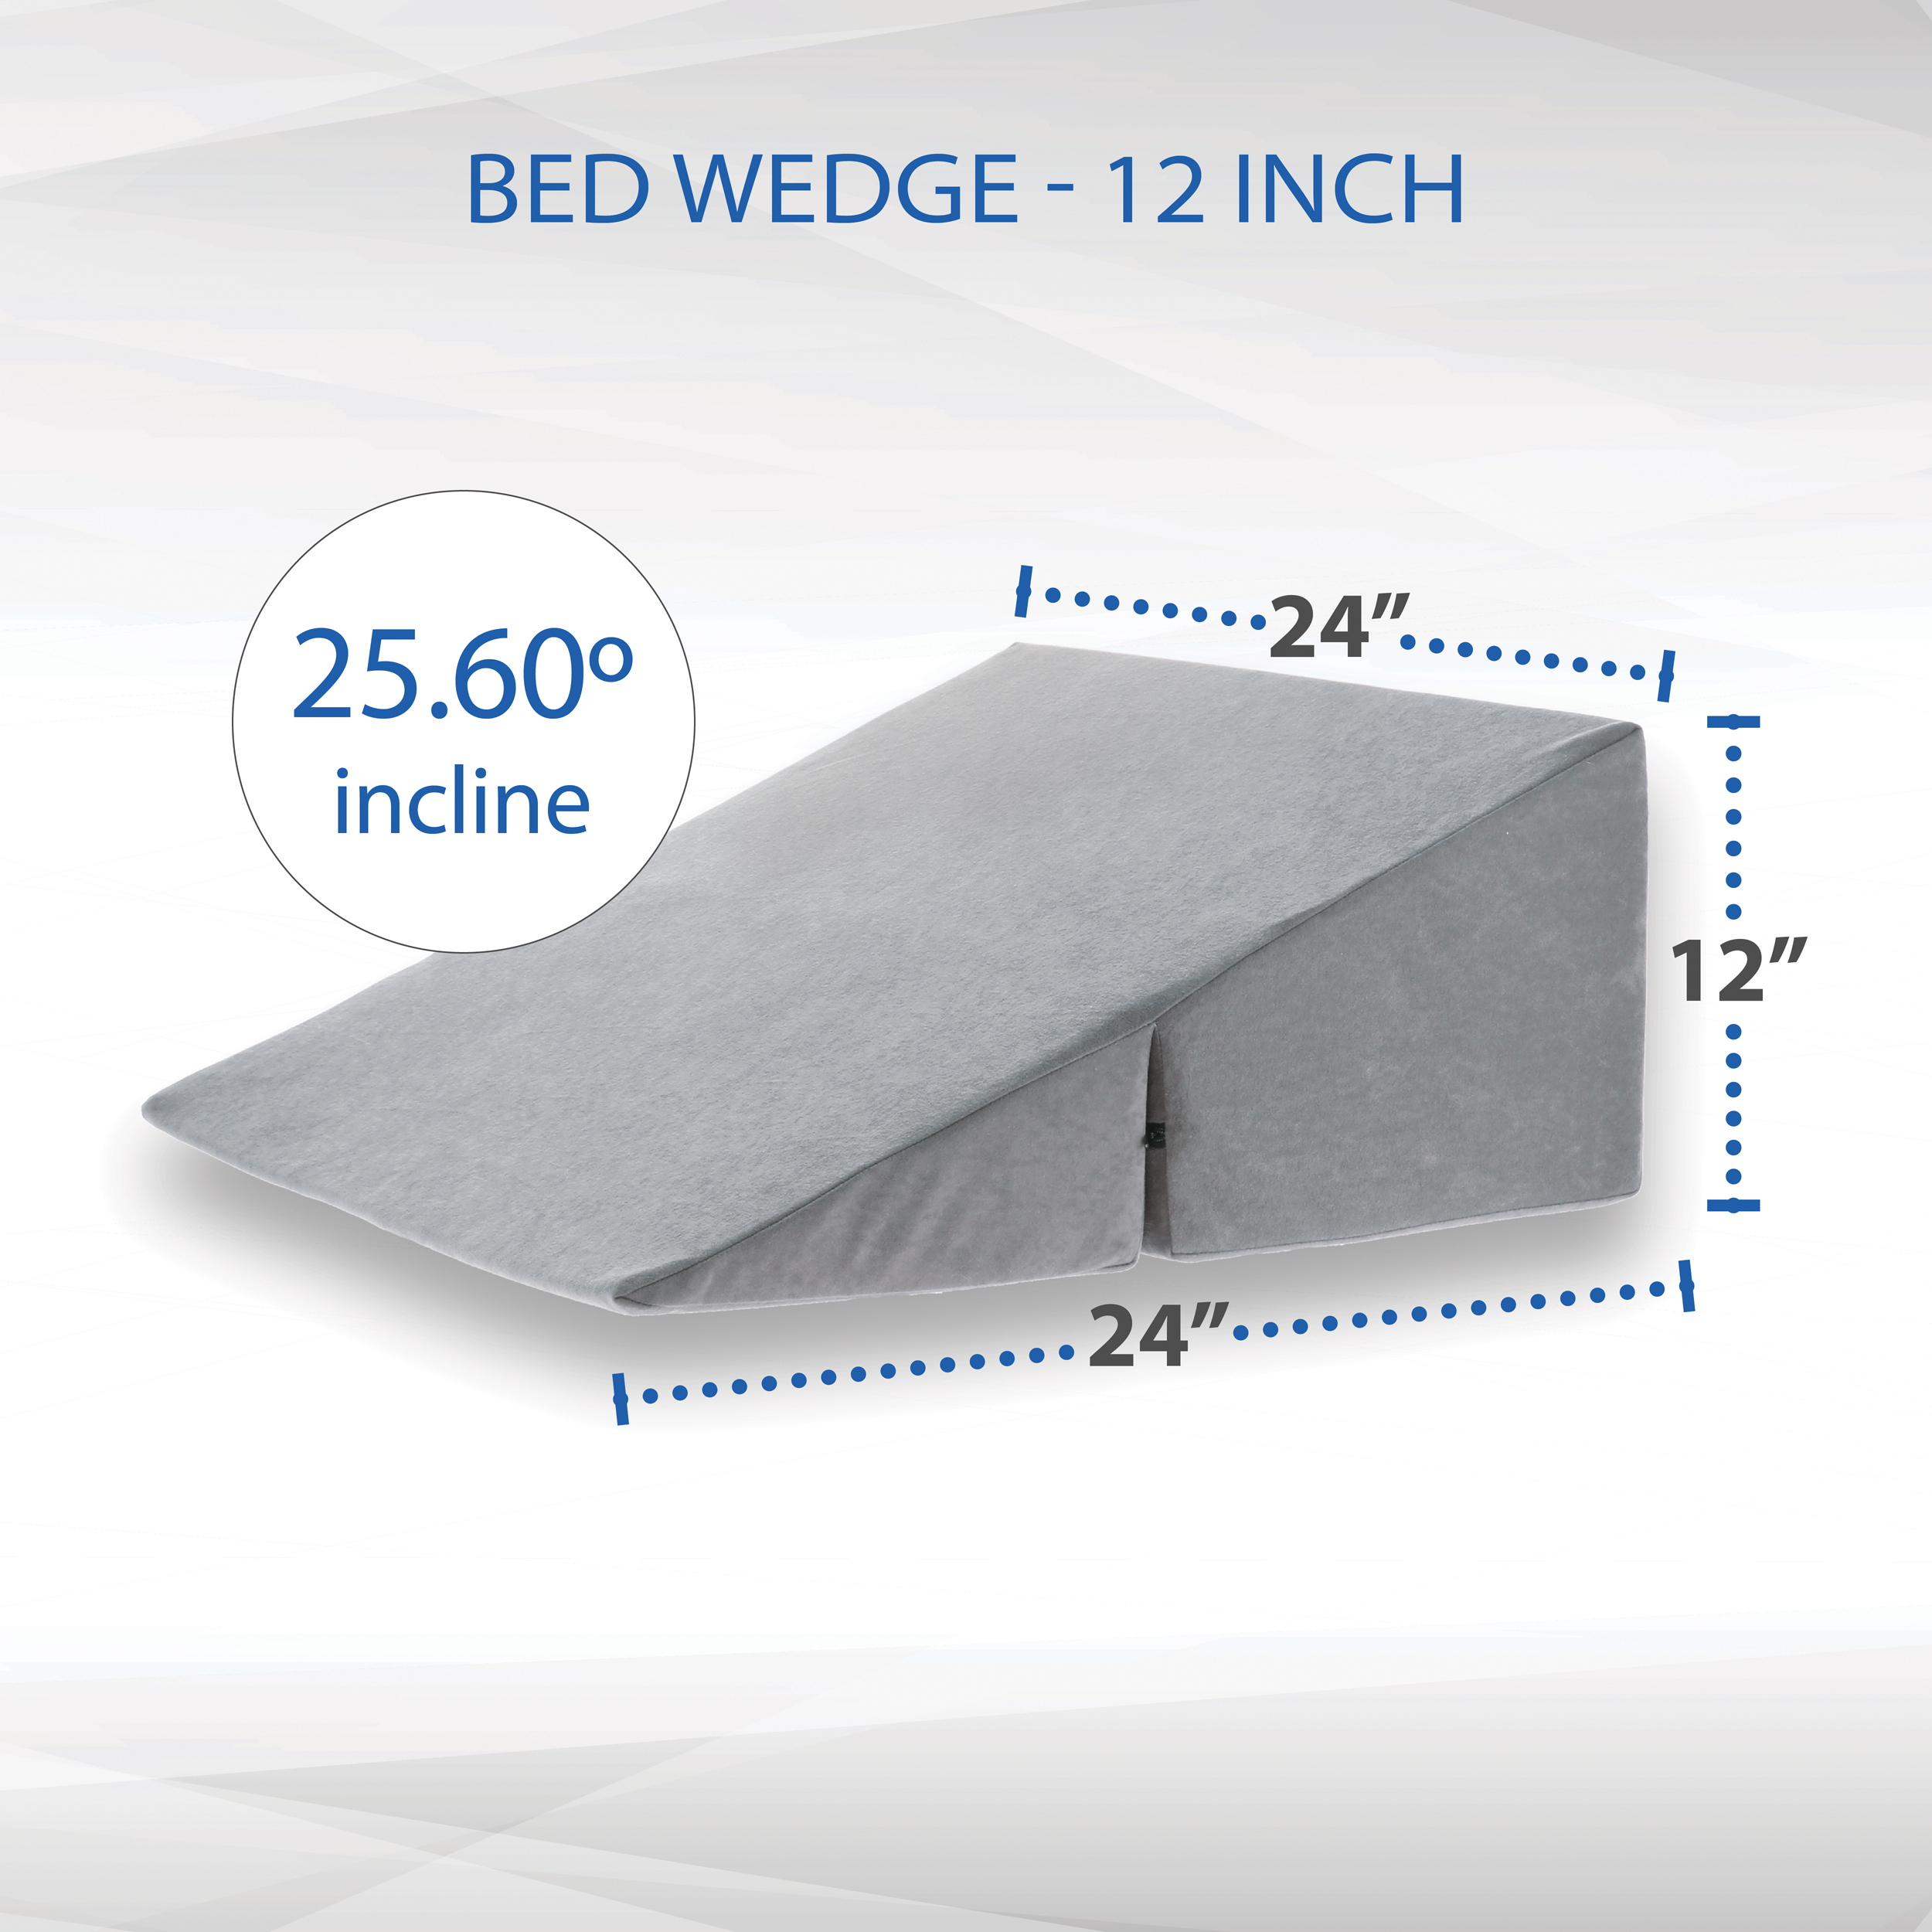 Boston Wedge Bed Cushion – The Skull Junkie Store